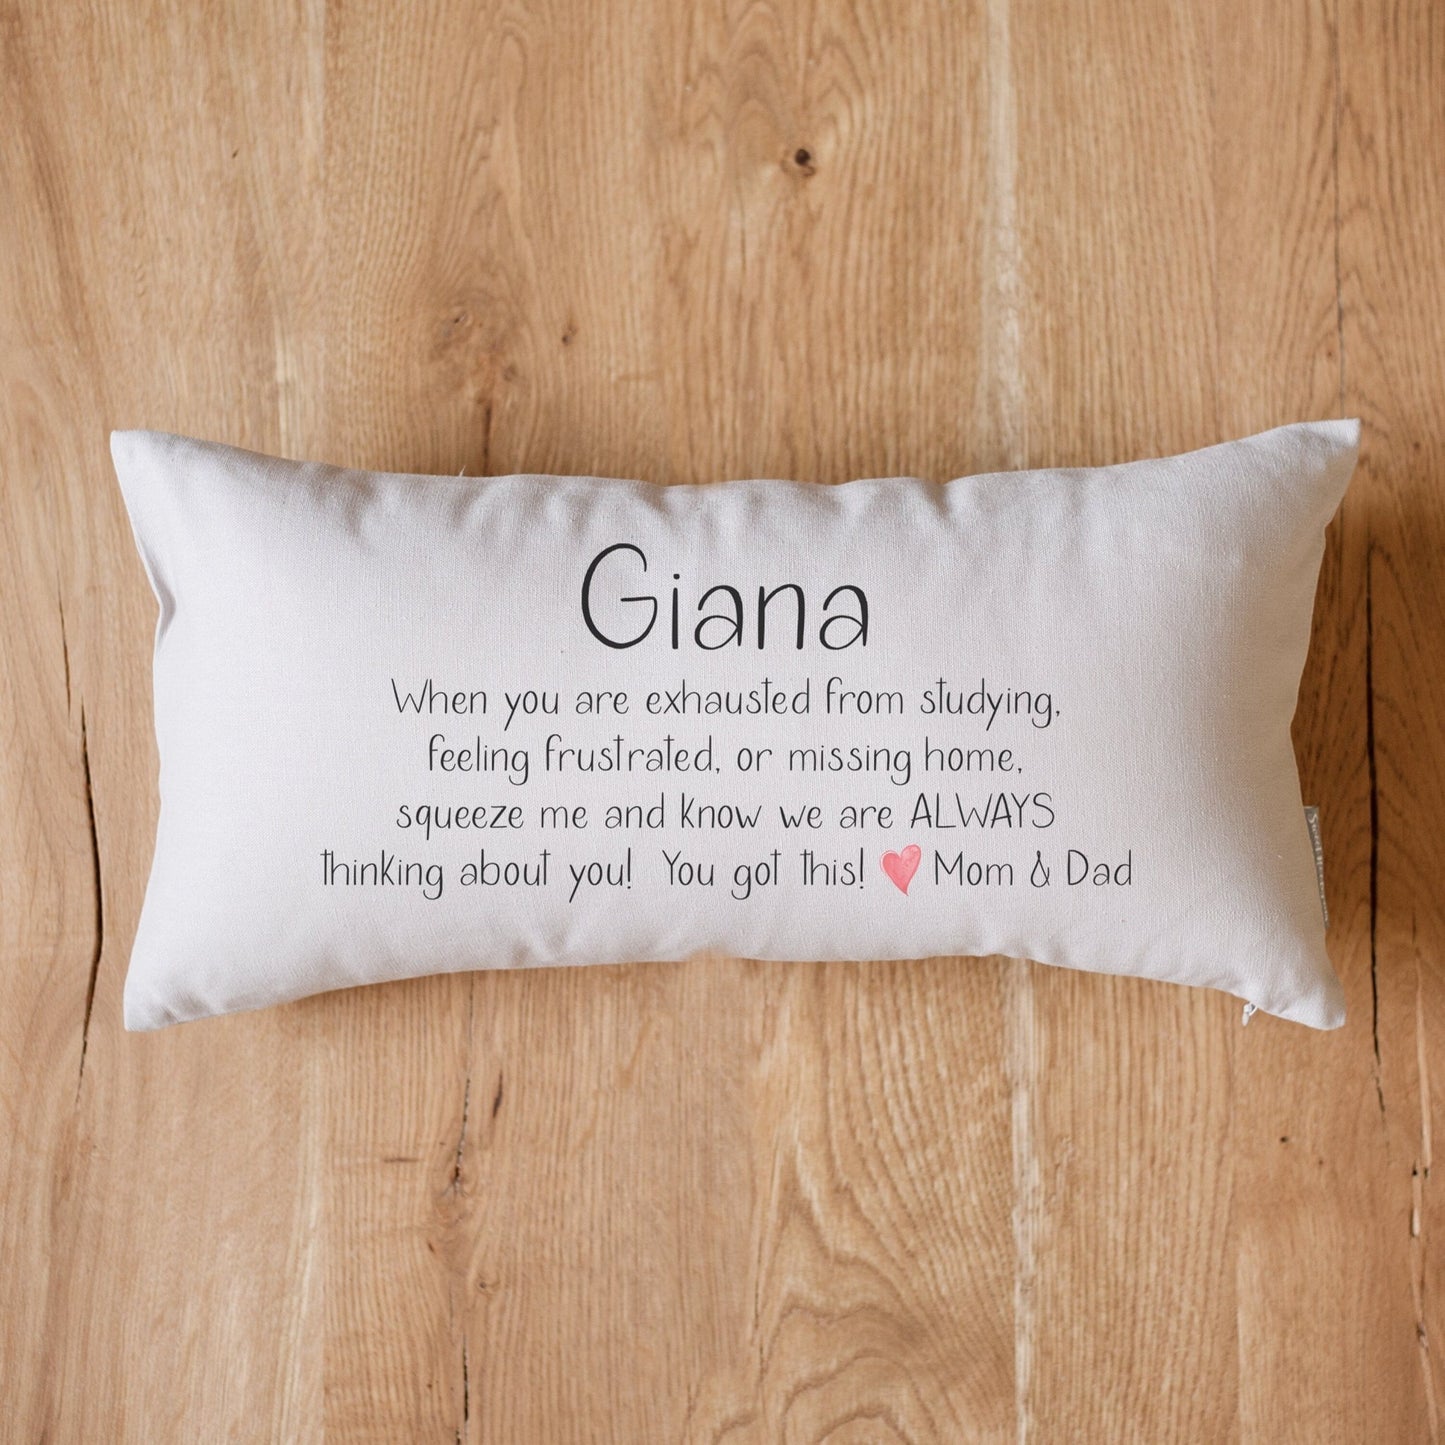 Personalized Pillows for Friends - A Thoughtful and Comfortable Gift Idea -  Famvibe